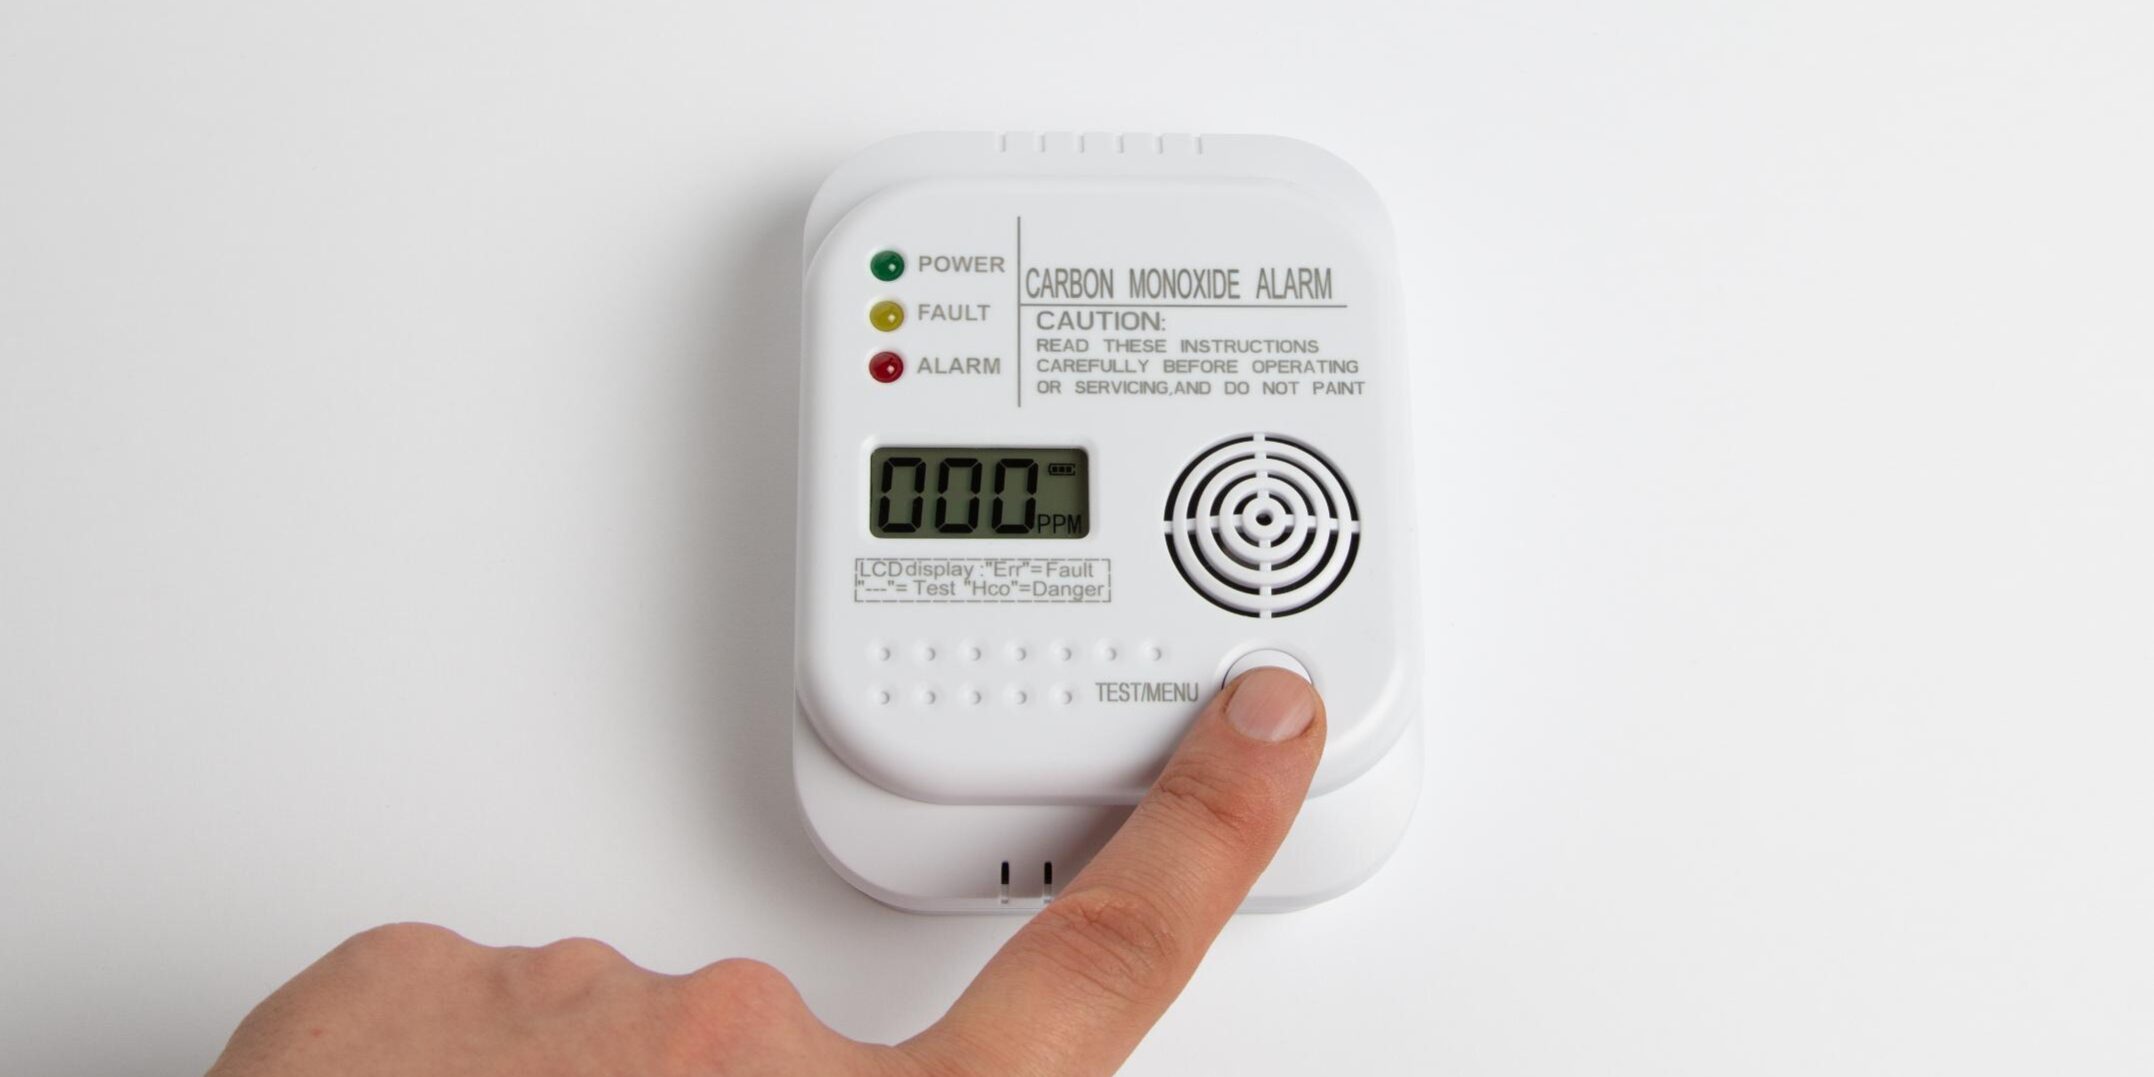 Where to Install Carbon Monoxide Alarm in Home